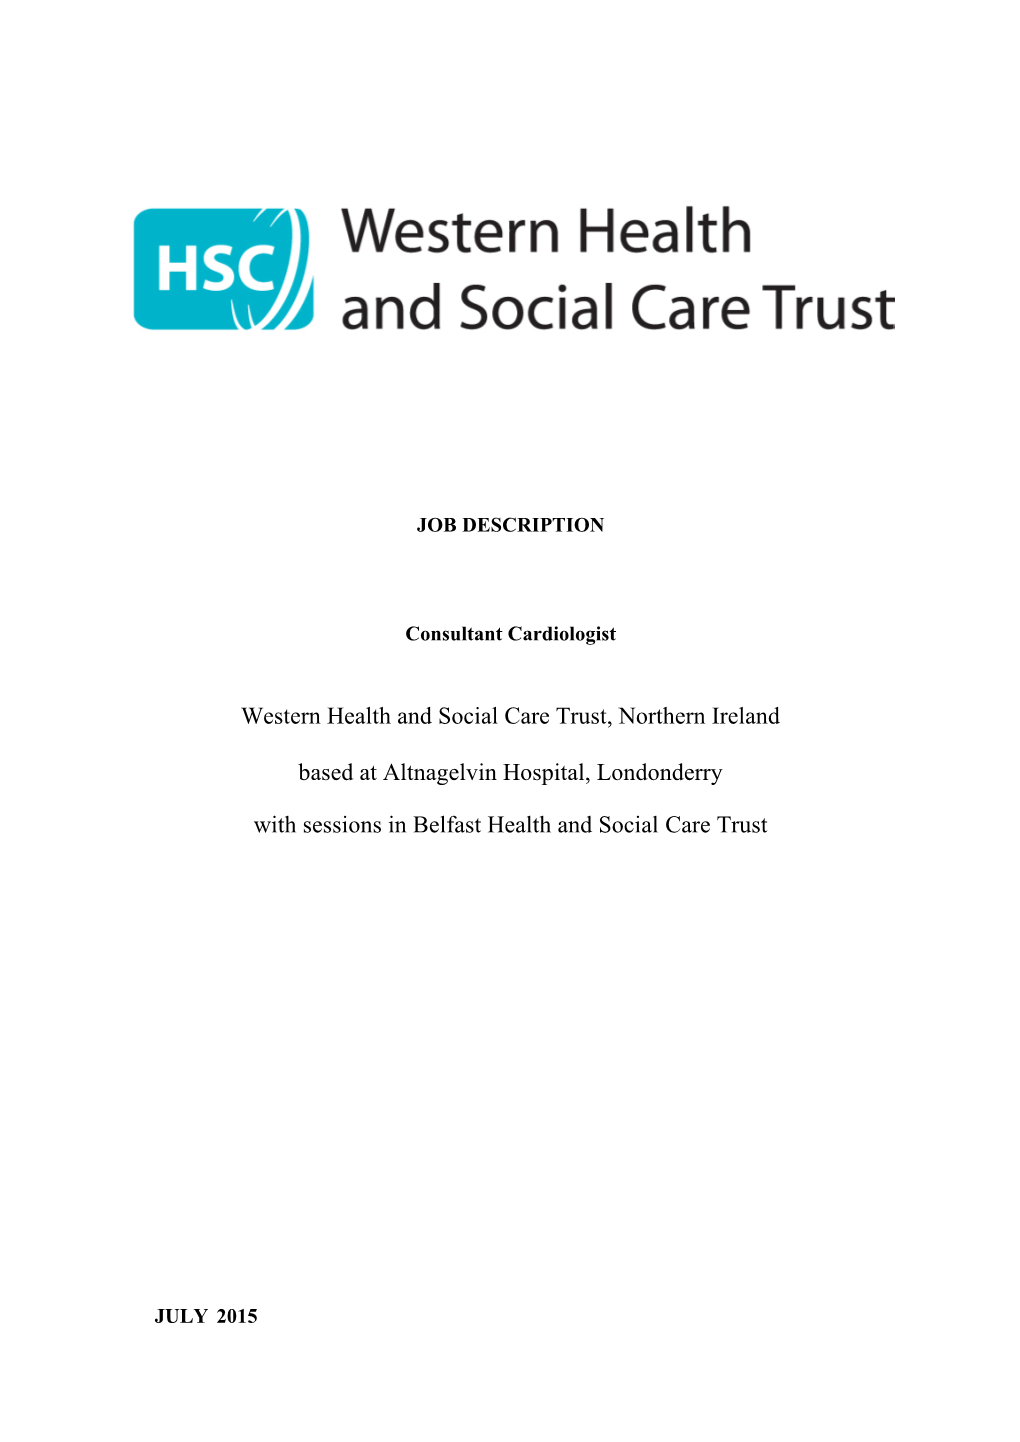 Western Health and Social Care Trust, Northern Ireland Based at Altnagelvin Hospital, Londonderry with Sessions in Belfast Healt